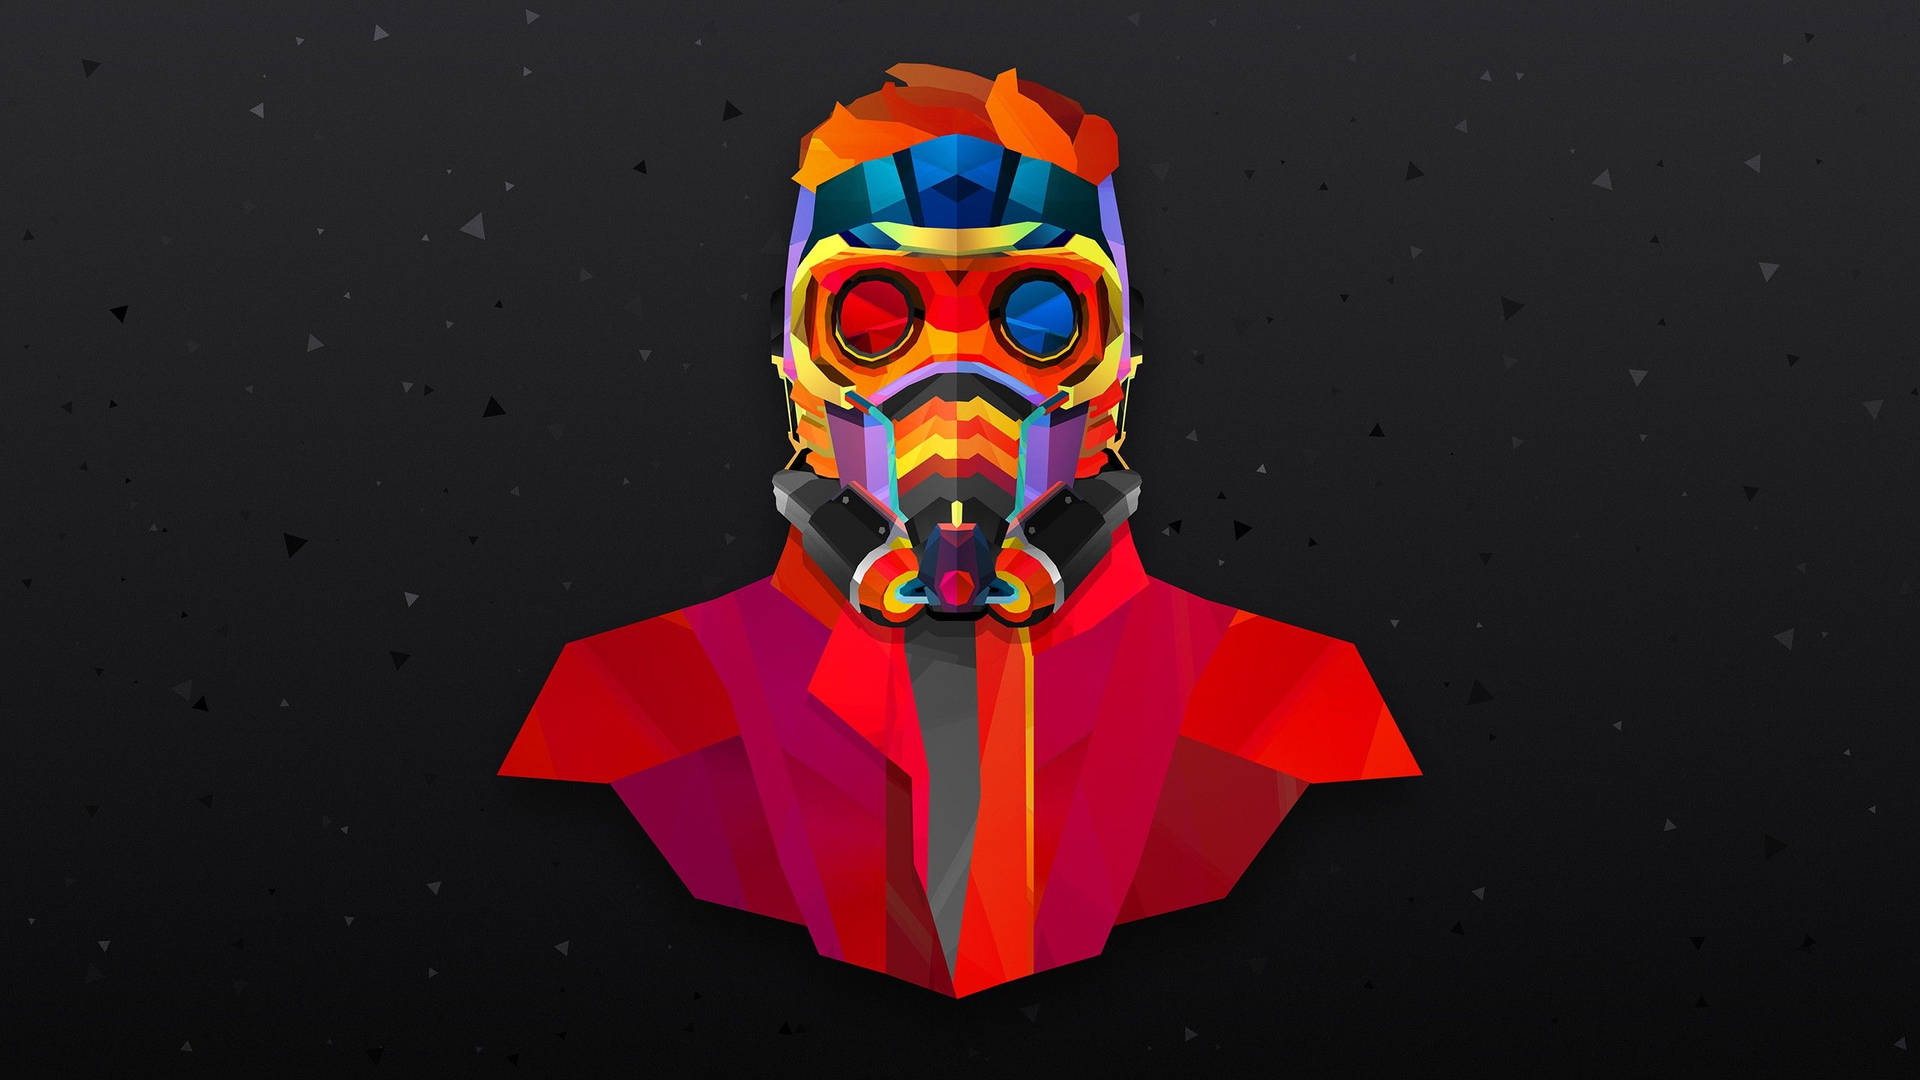 Marvel Star Lord Colorful Abstract Digital Art Background